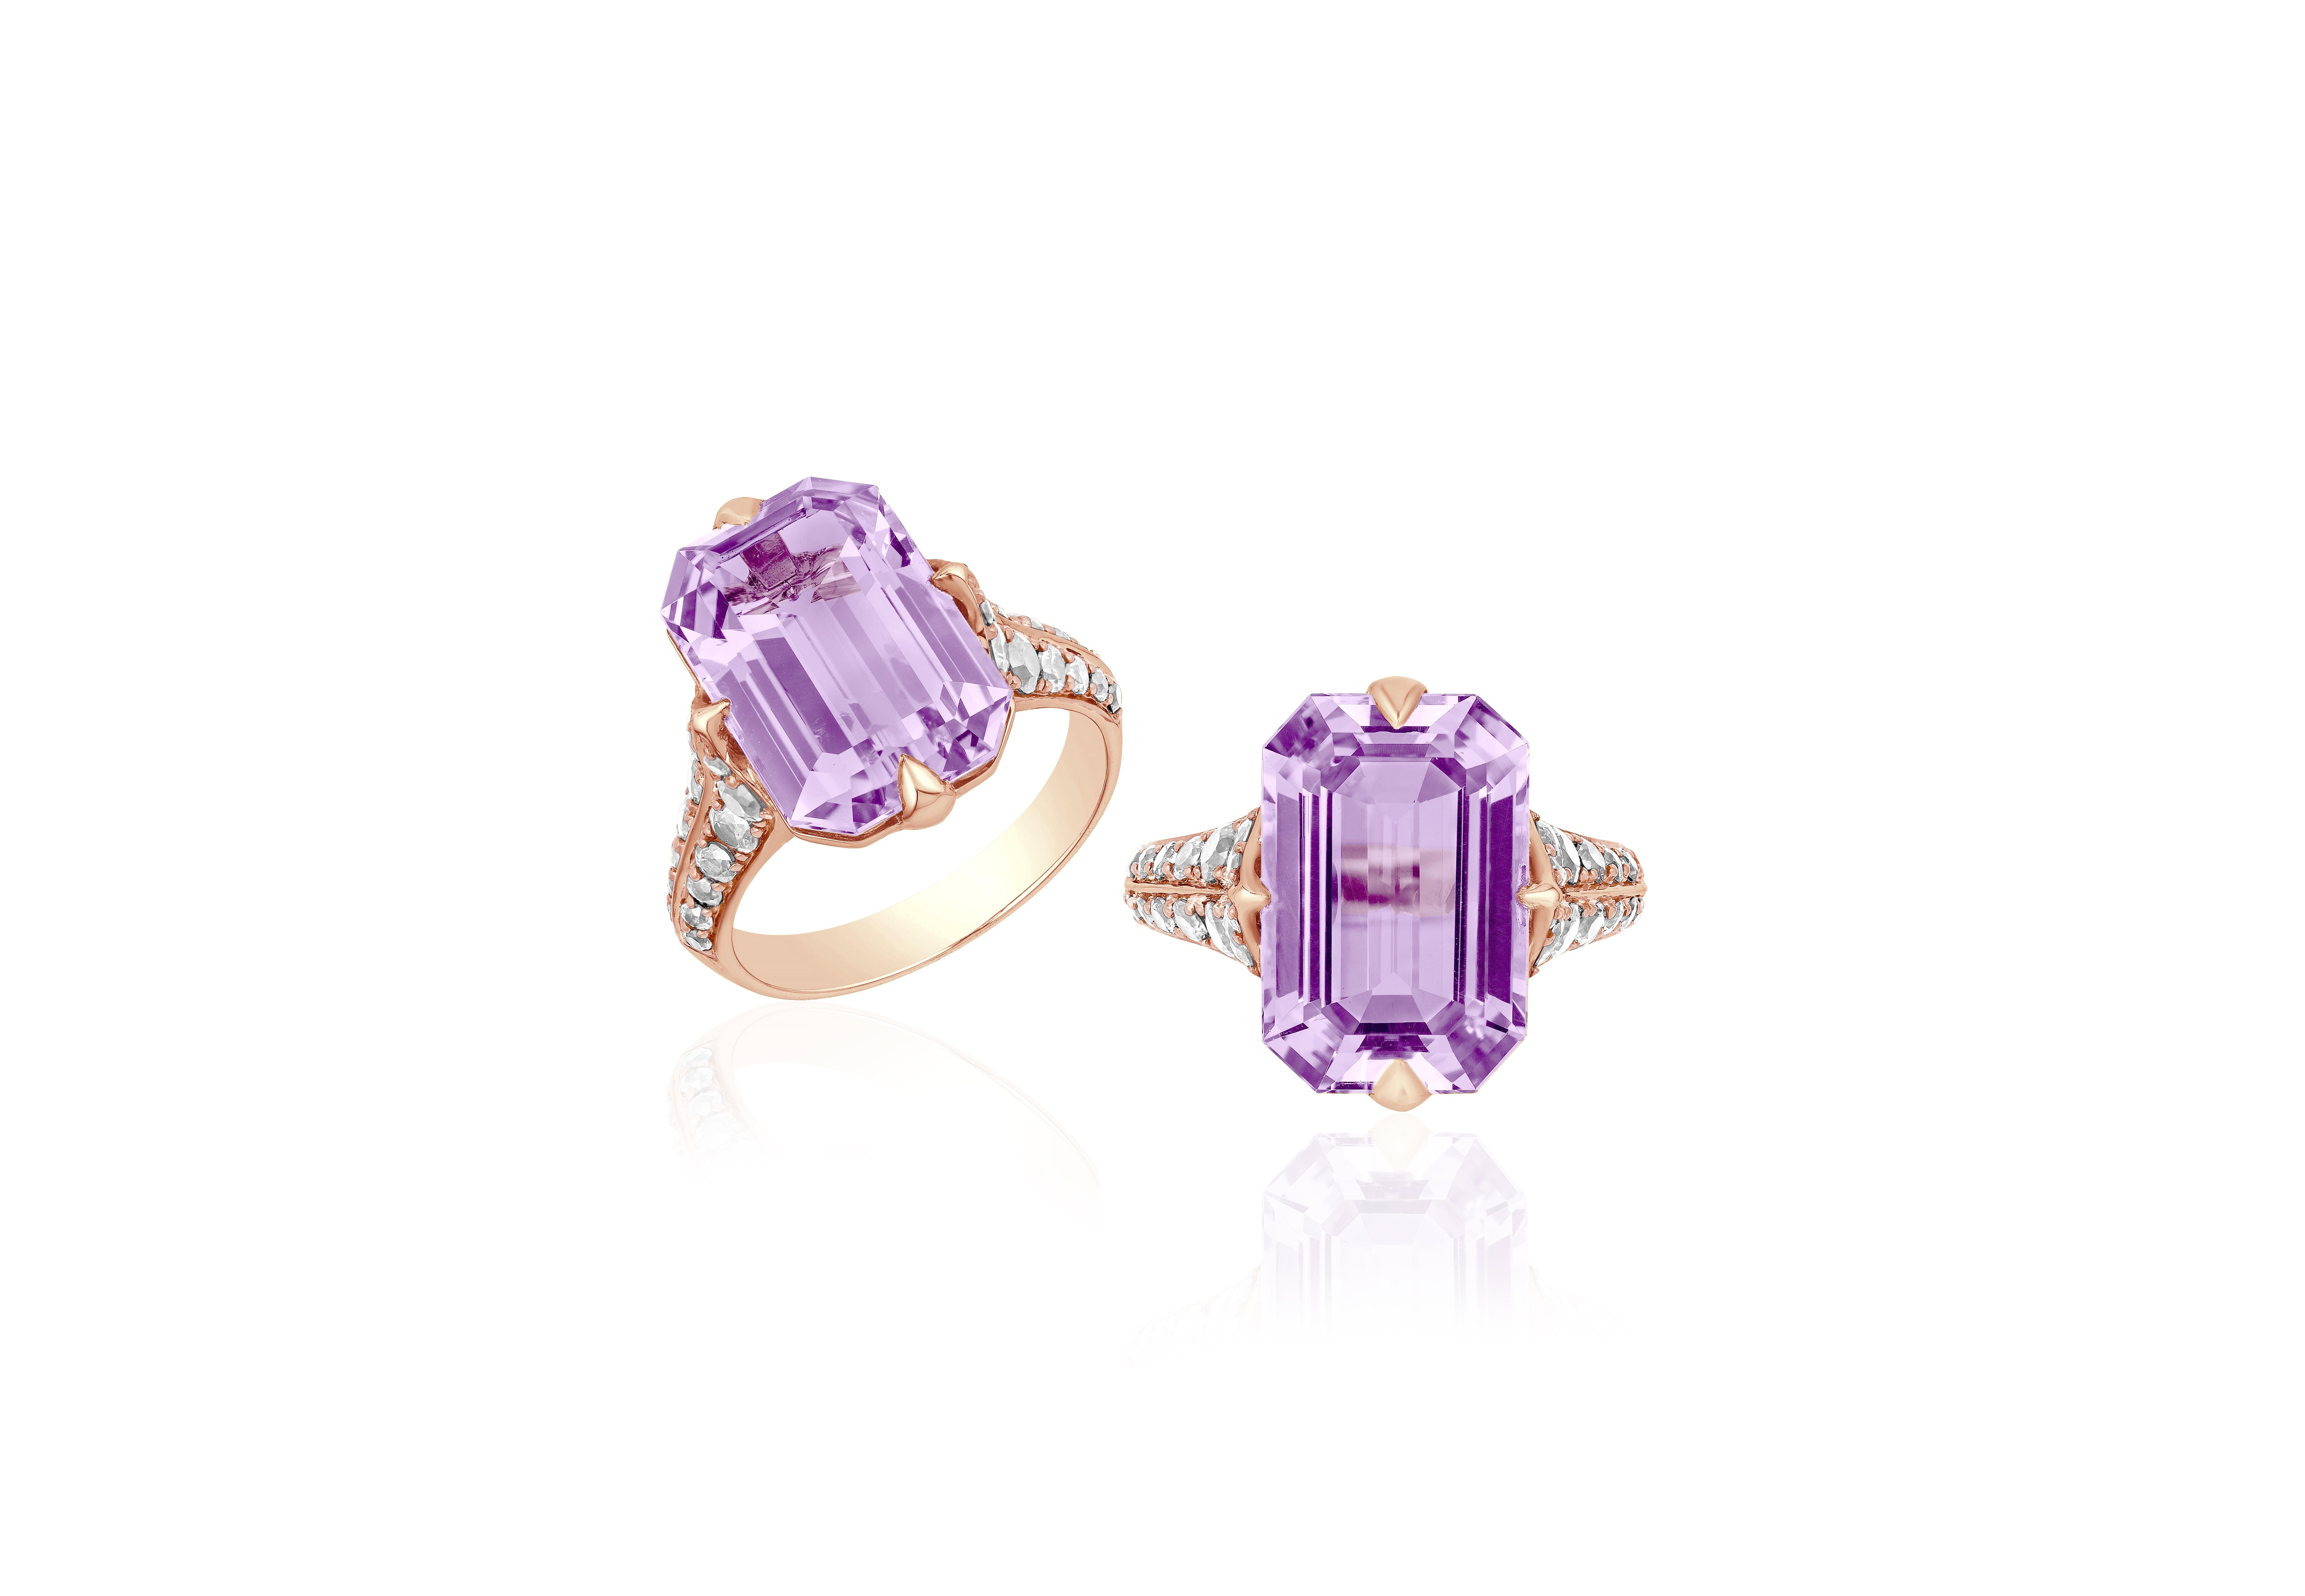 This Lavender Amethyst Emerald Cut Ring with Diamonds is a stunning piece of jewelry from the 'Rain Forest' Collection. The ring is crafted from 18K rose gold and features a beautiful emerald-cut lavender amethyst as its centerpiece, surrounded by